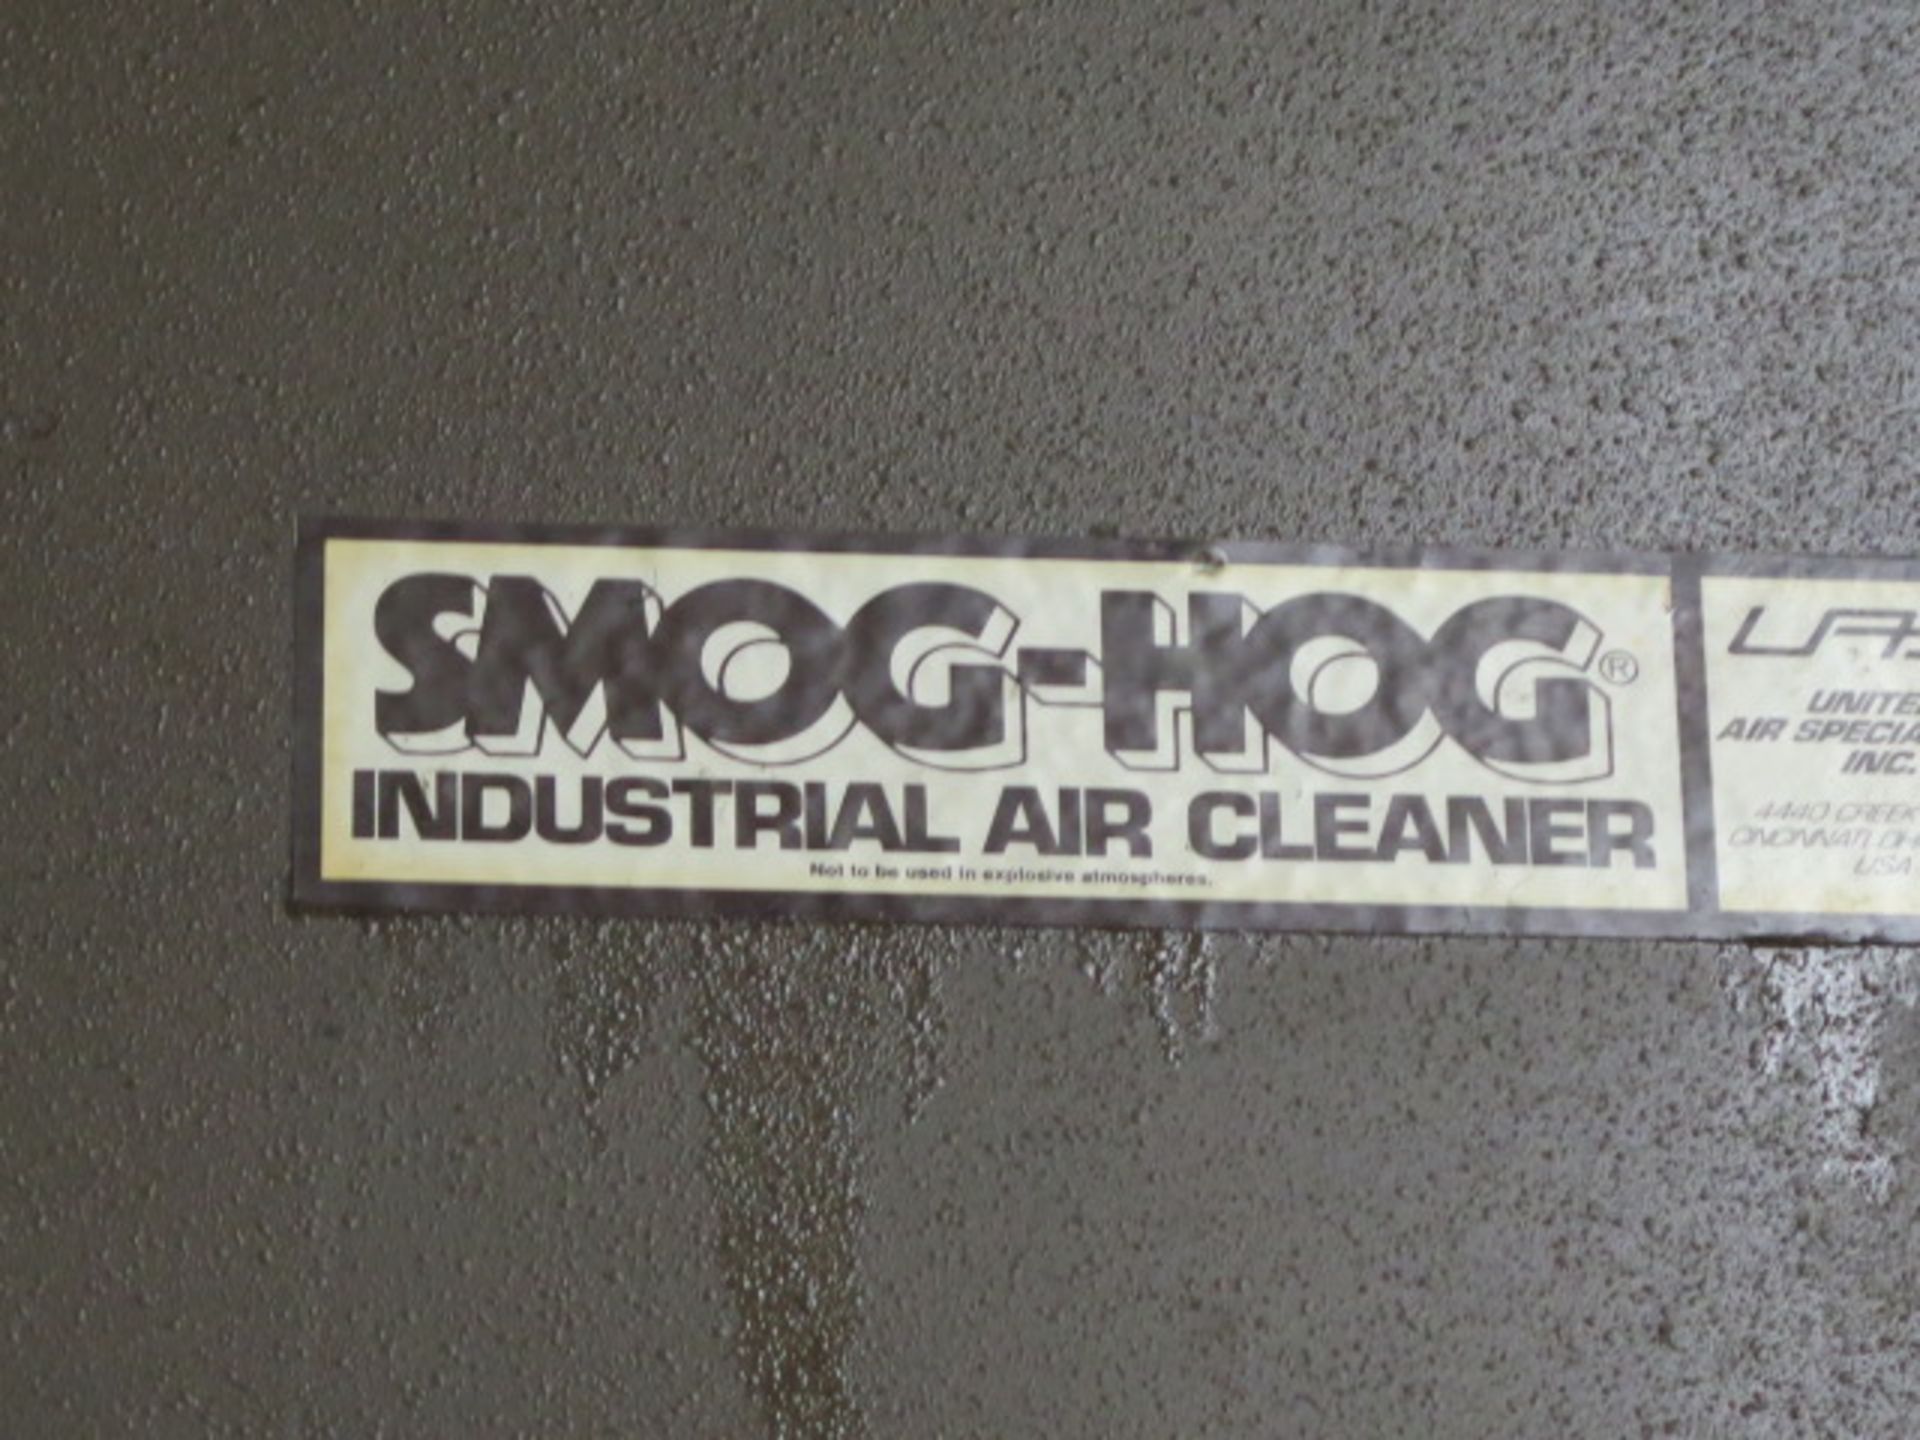 Smog-Hog Industrial Air Cleaner (SOLD AS-IS - NO WARRANTY) - Image 4 of 4